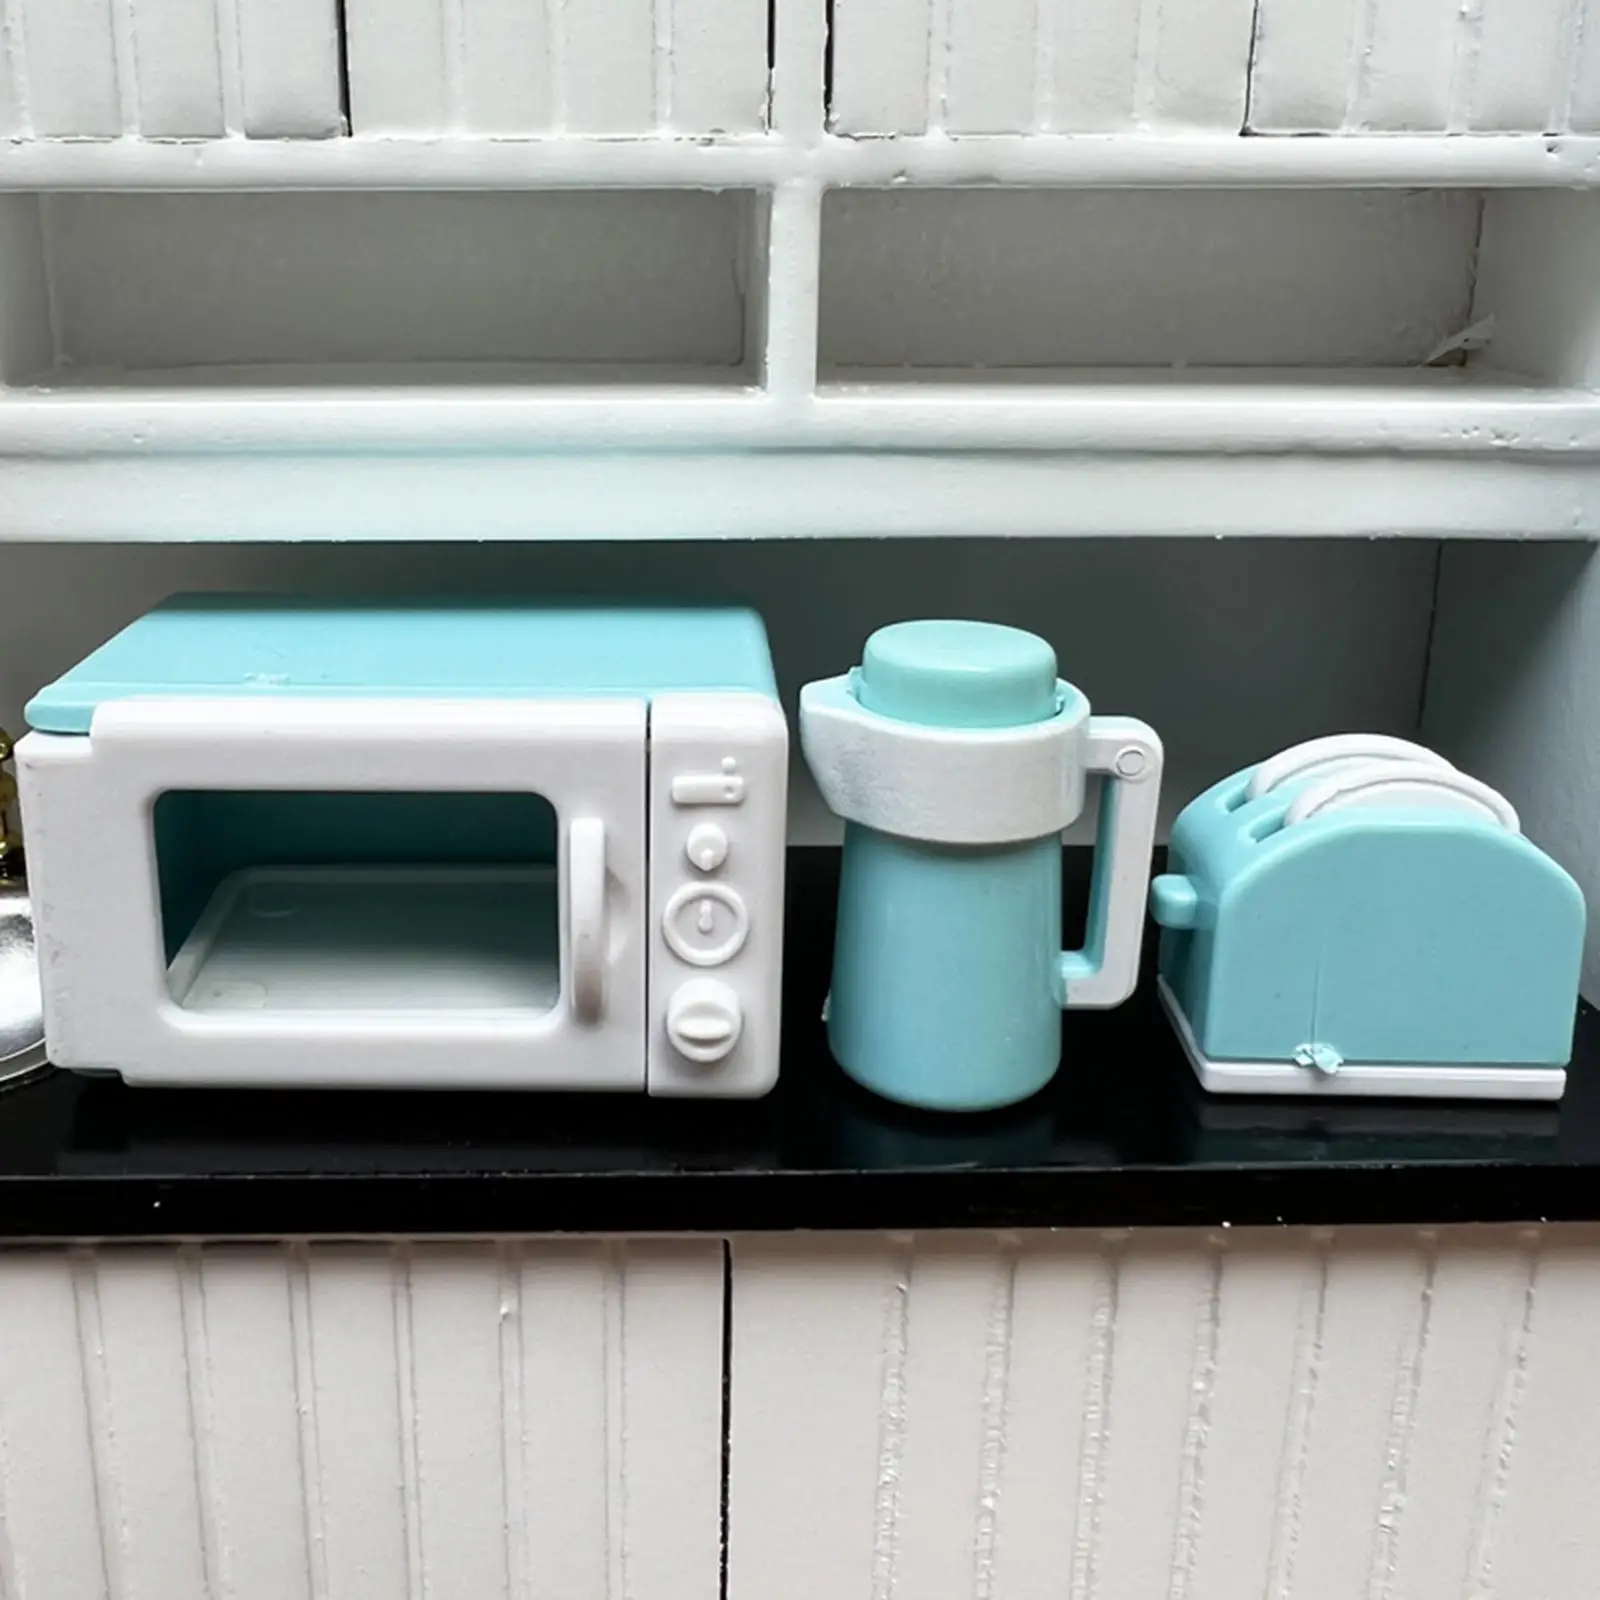 1:12 Scale Dollhouse Kitchen Microwave Oven Playset Furniture for Ornament Kids Gifts